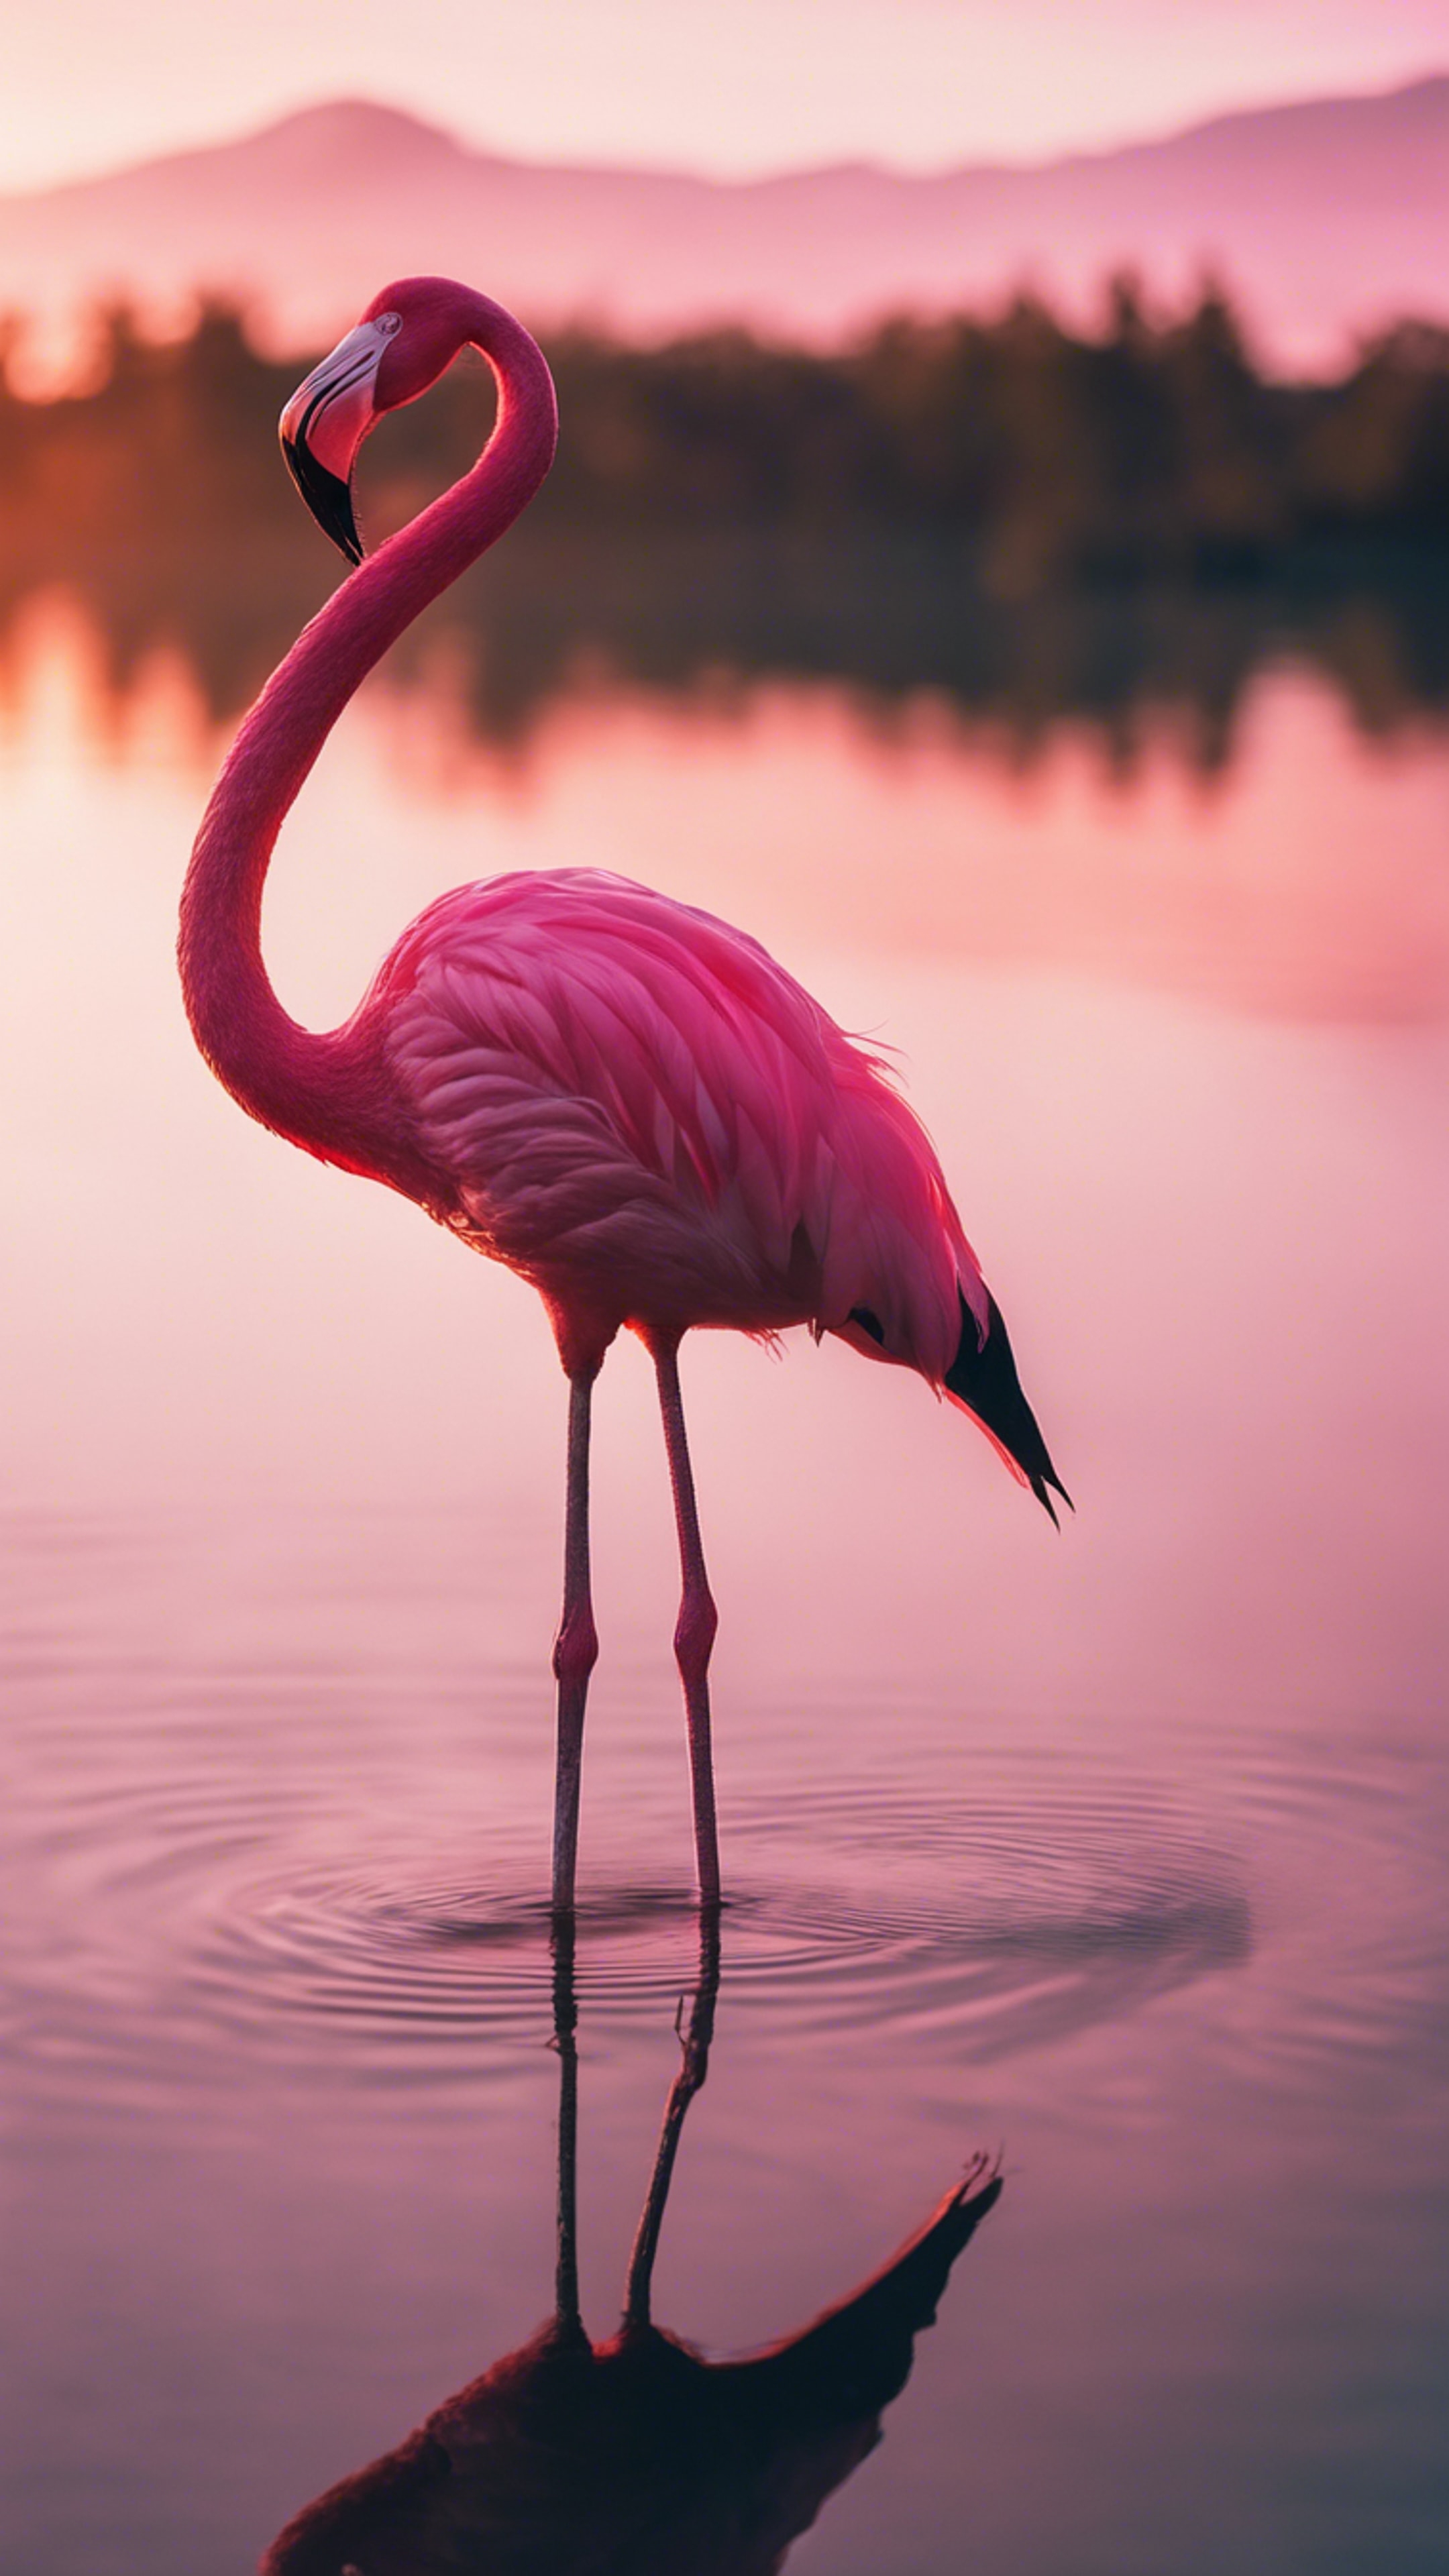 A neon pink flamingo standing serenely beside a glistening lake.壁紙[600690a99c074e138b5e]